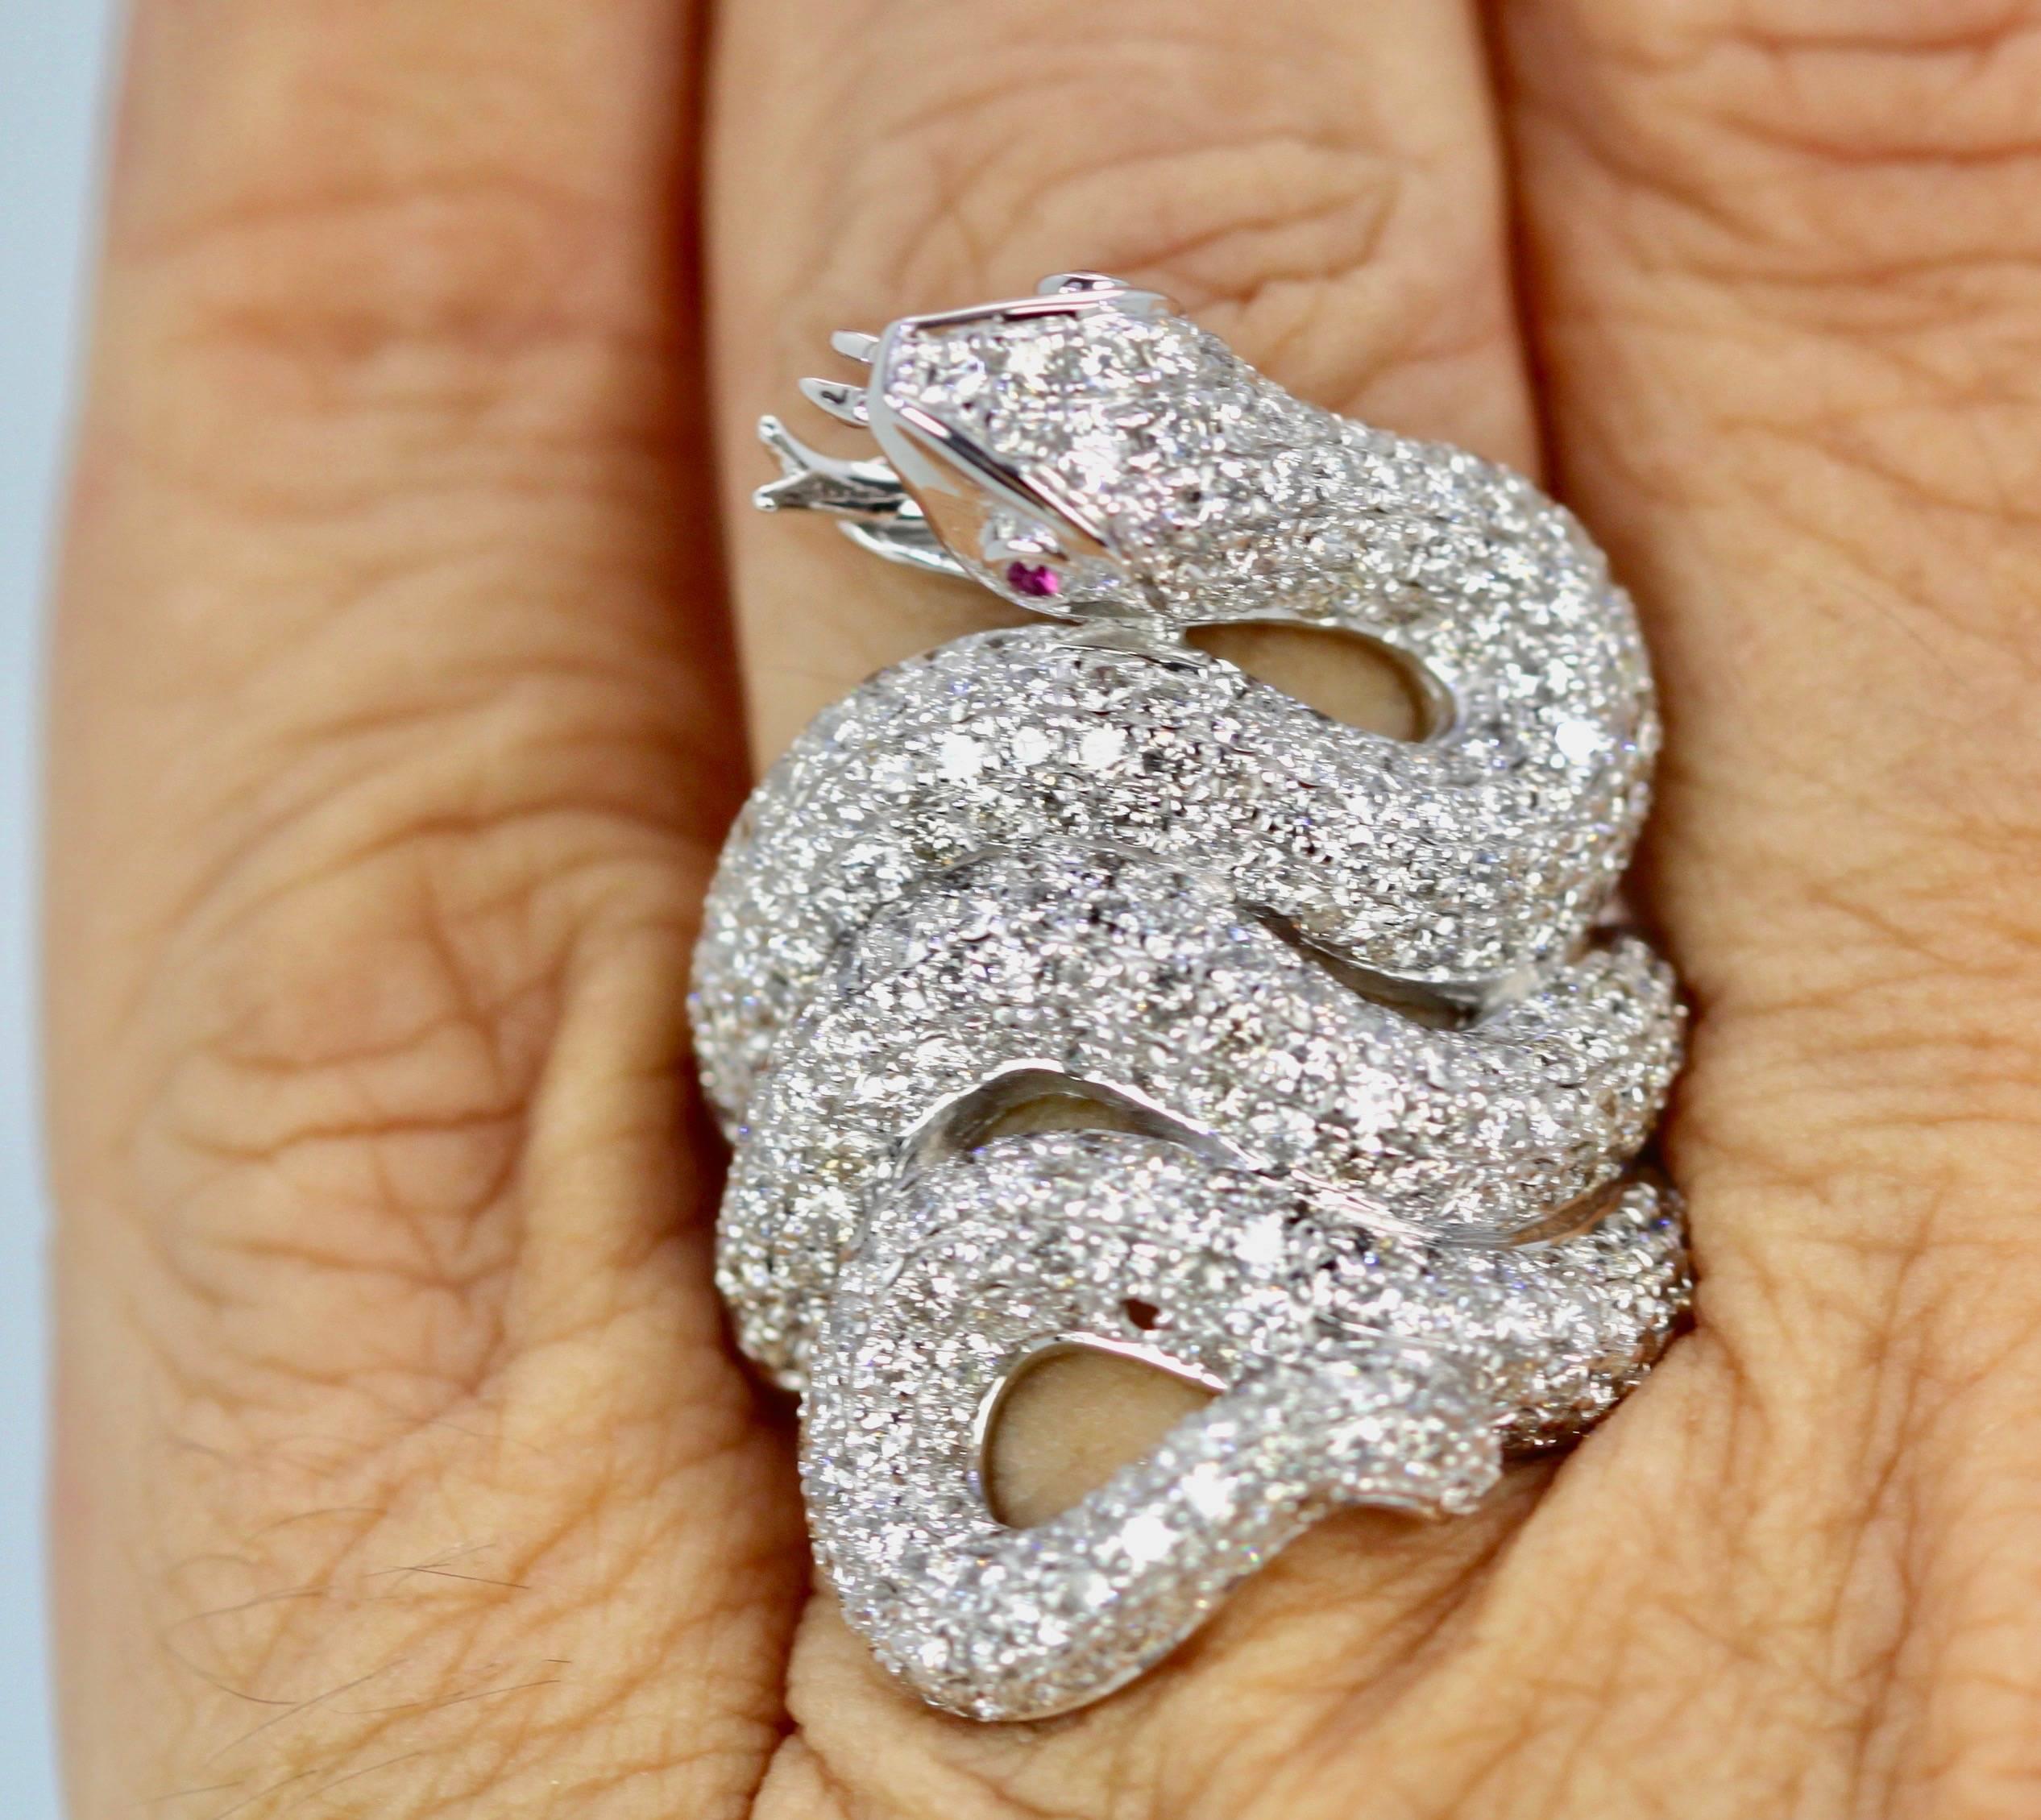 This Snake Ring is covered in Diamonds and is one of my favorites.  As you can see from the photo's this ring is large and covers my finger and it is dramatic.  For Snake lovers this is the dream snake ring, and all in Diamonds.
This piece is new